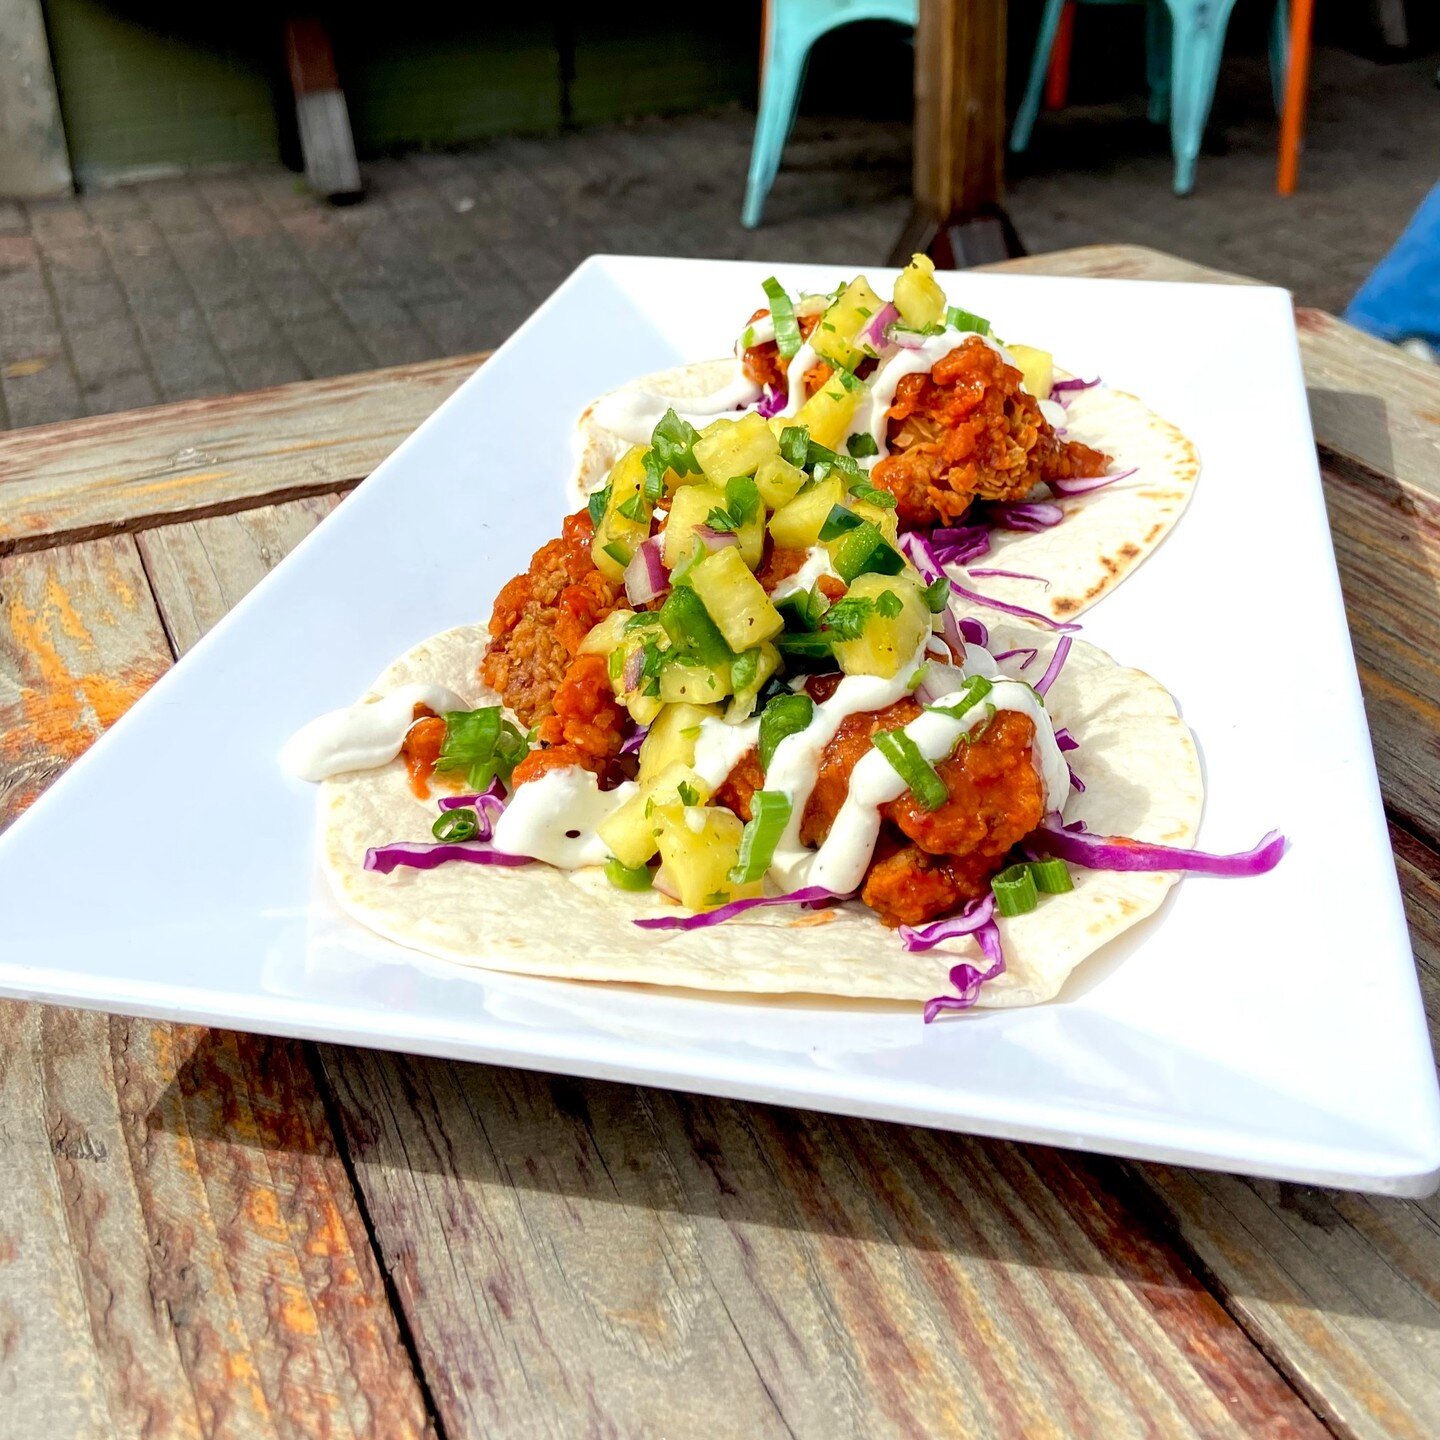 We still have the Tropical Buffalo Taco! Come and get it before it's gone!